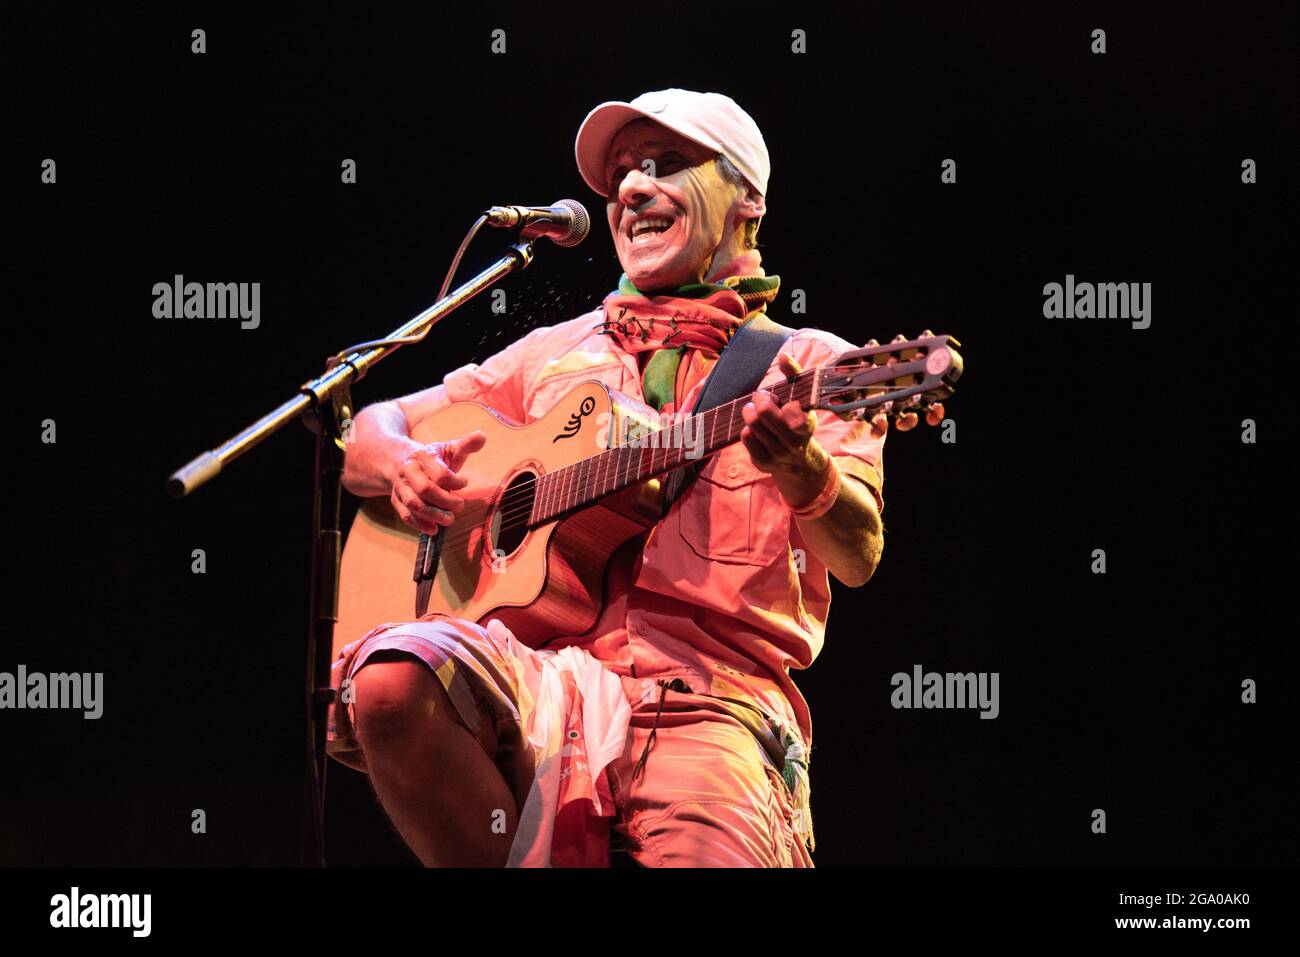 COLLEGNO, FLOWERS FESTIVAL, JULY 27TH 2021: The French singer of Spanish descent Manu Chao performing live on stage for his “El Chapulín Solo – Manu Chao Acústico” Italian tour. Stock Photo